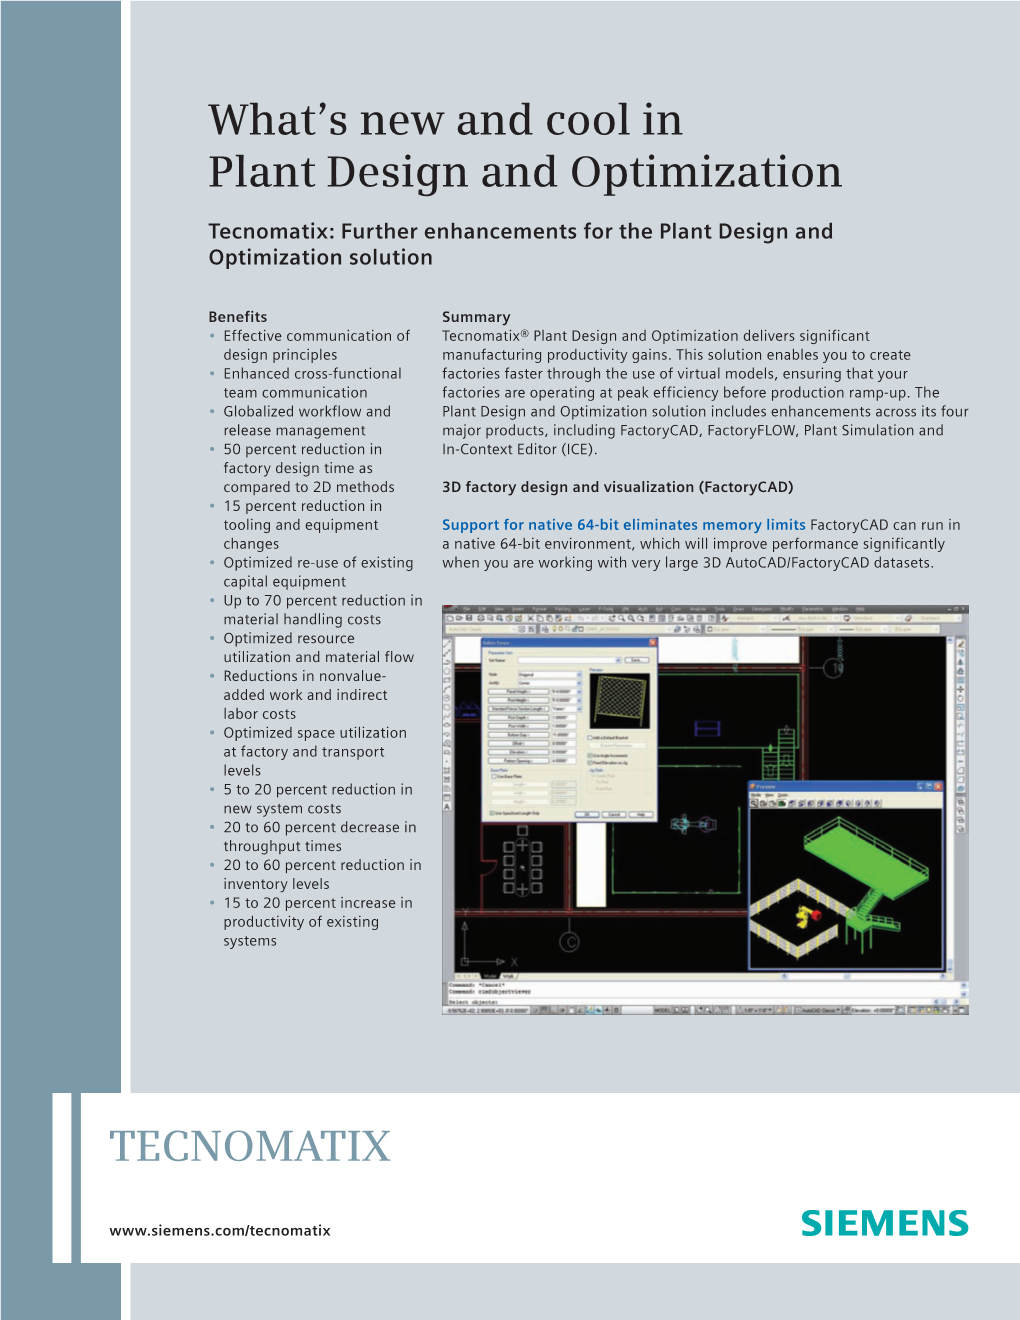 What's New and Cool in Plant Design and Optimization